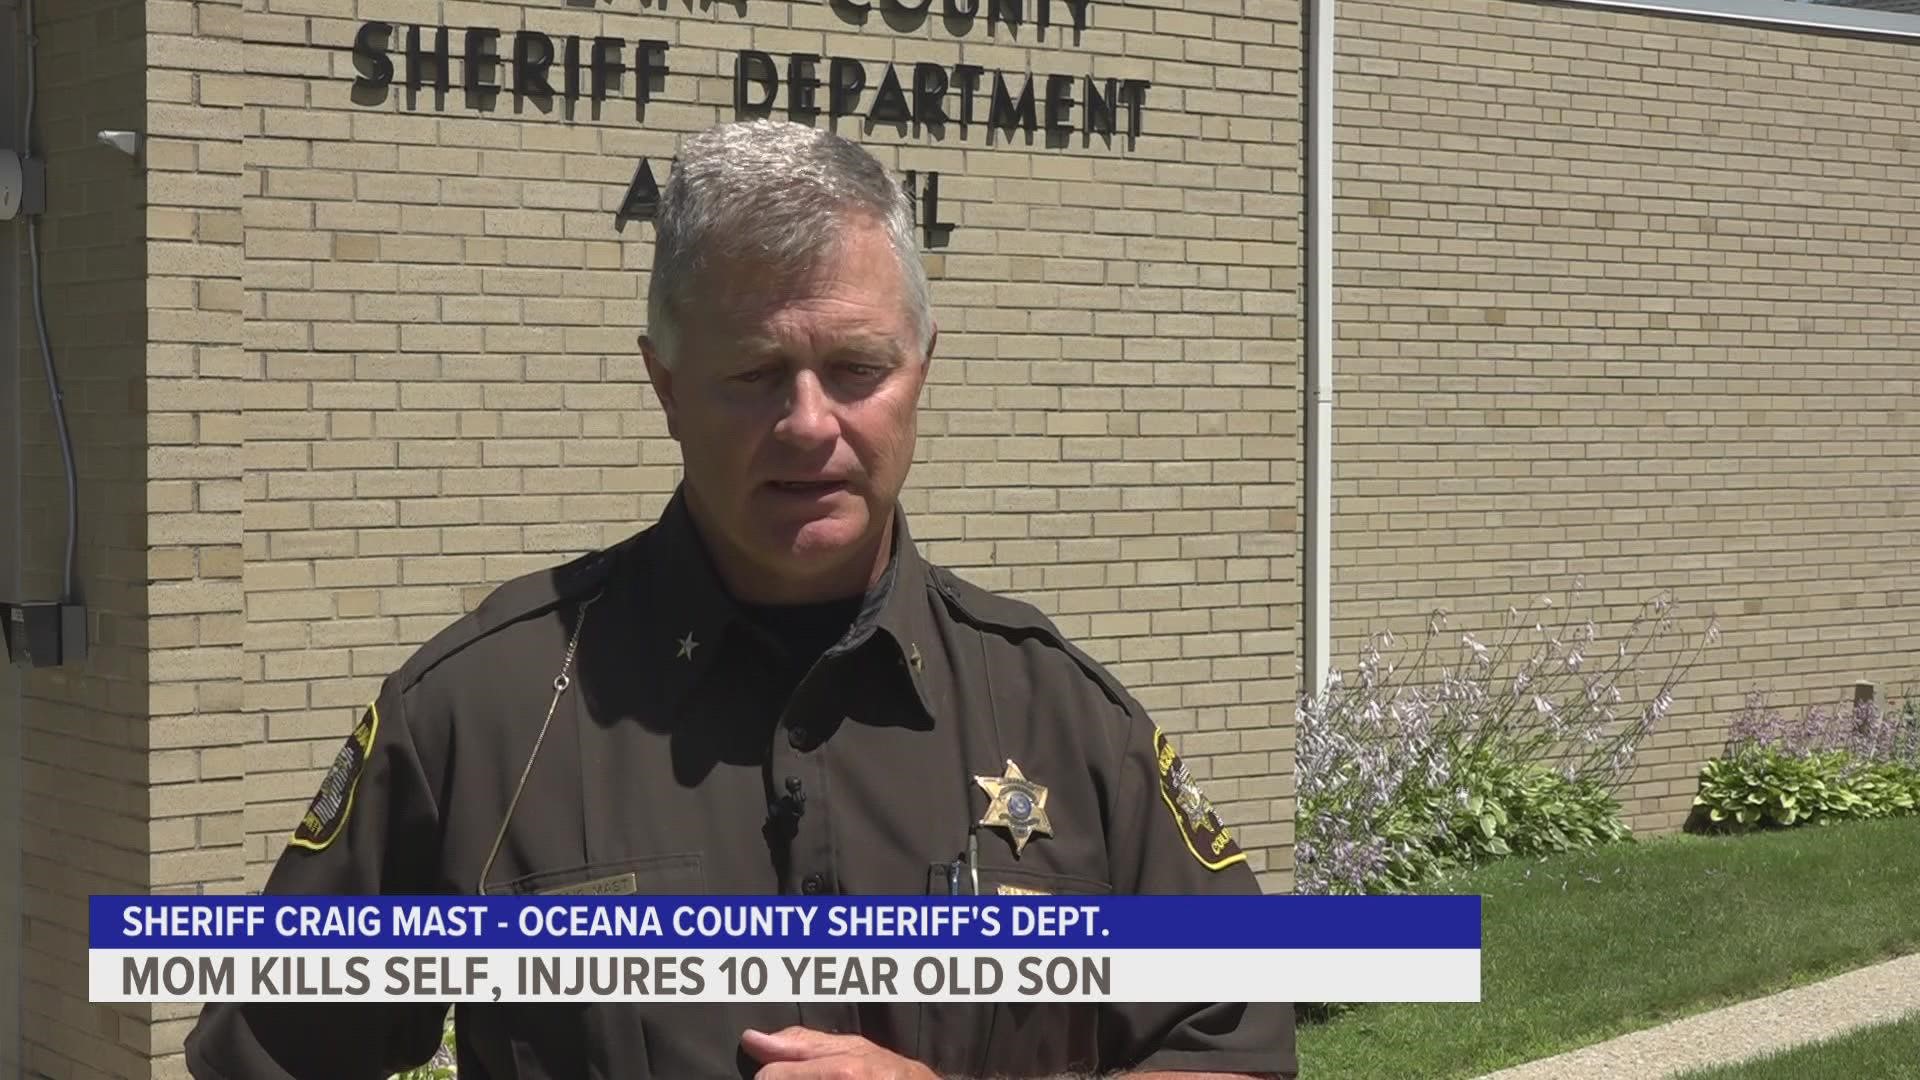 A 10-year-old boy is clinging to life after his mother shot him in the head, and then shot herself in Oceana County. The mother was found dead.